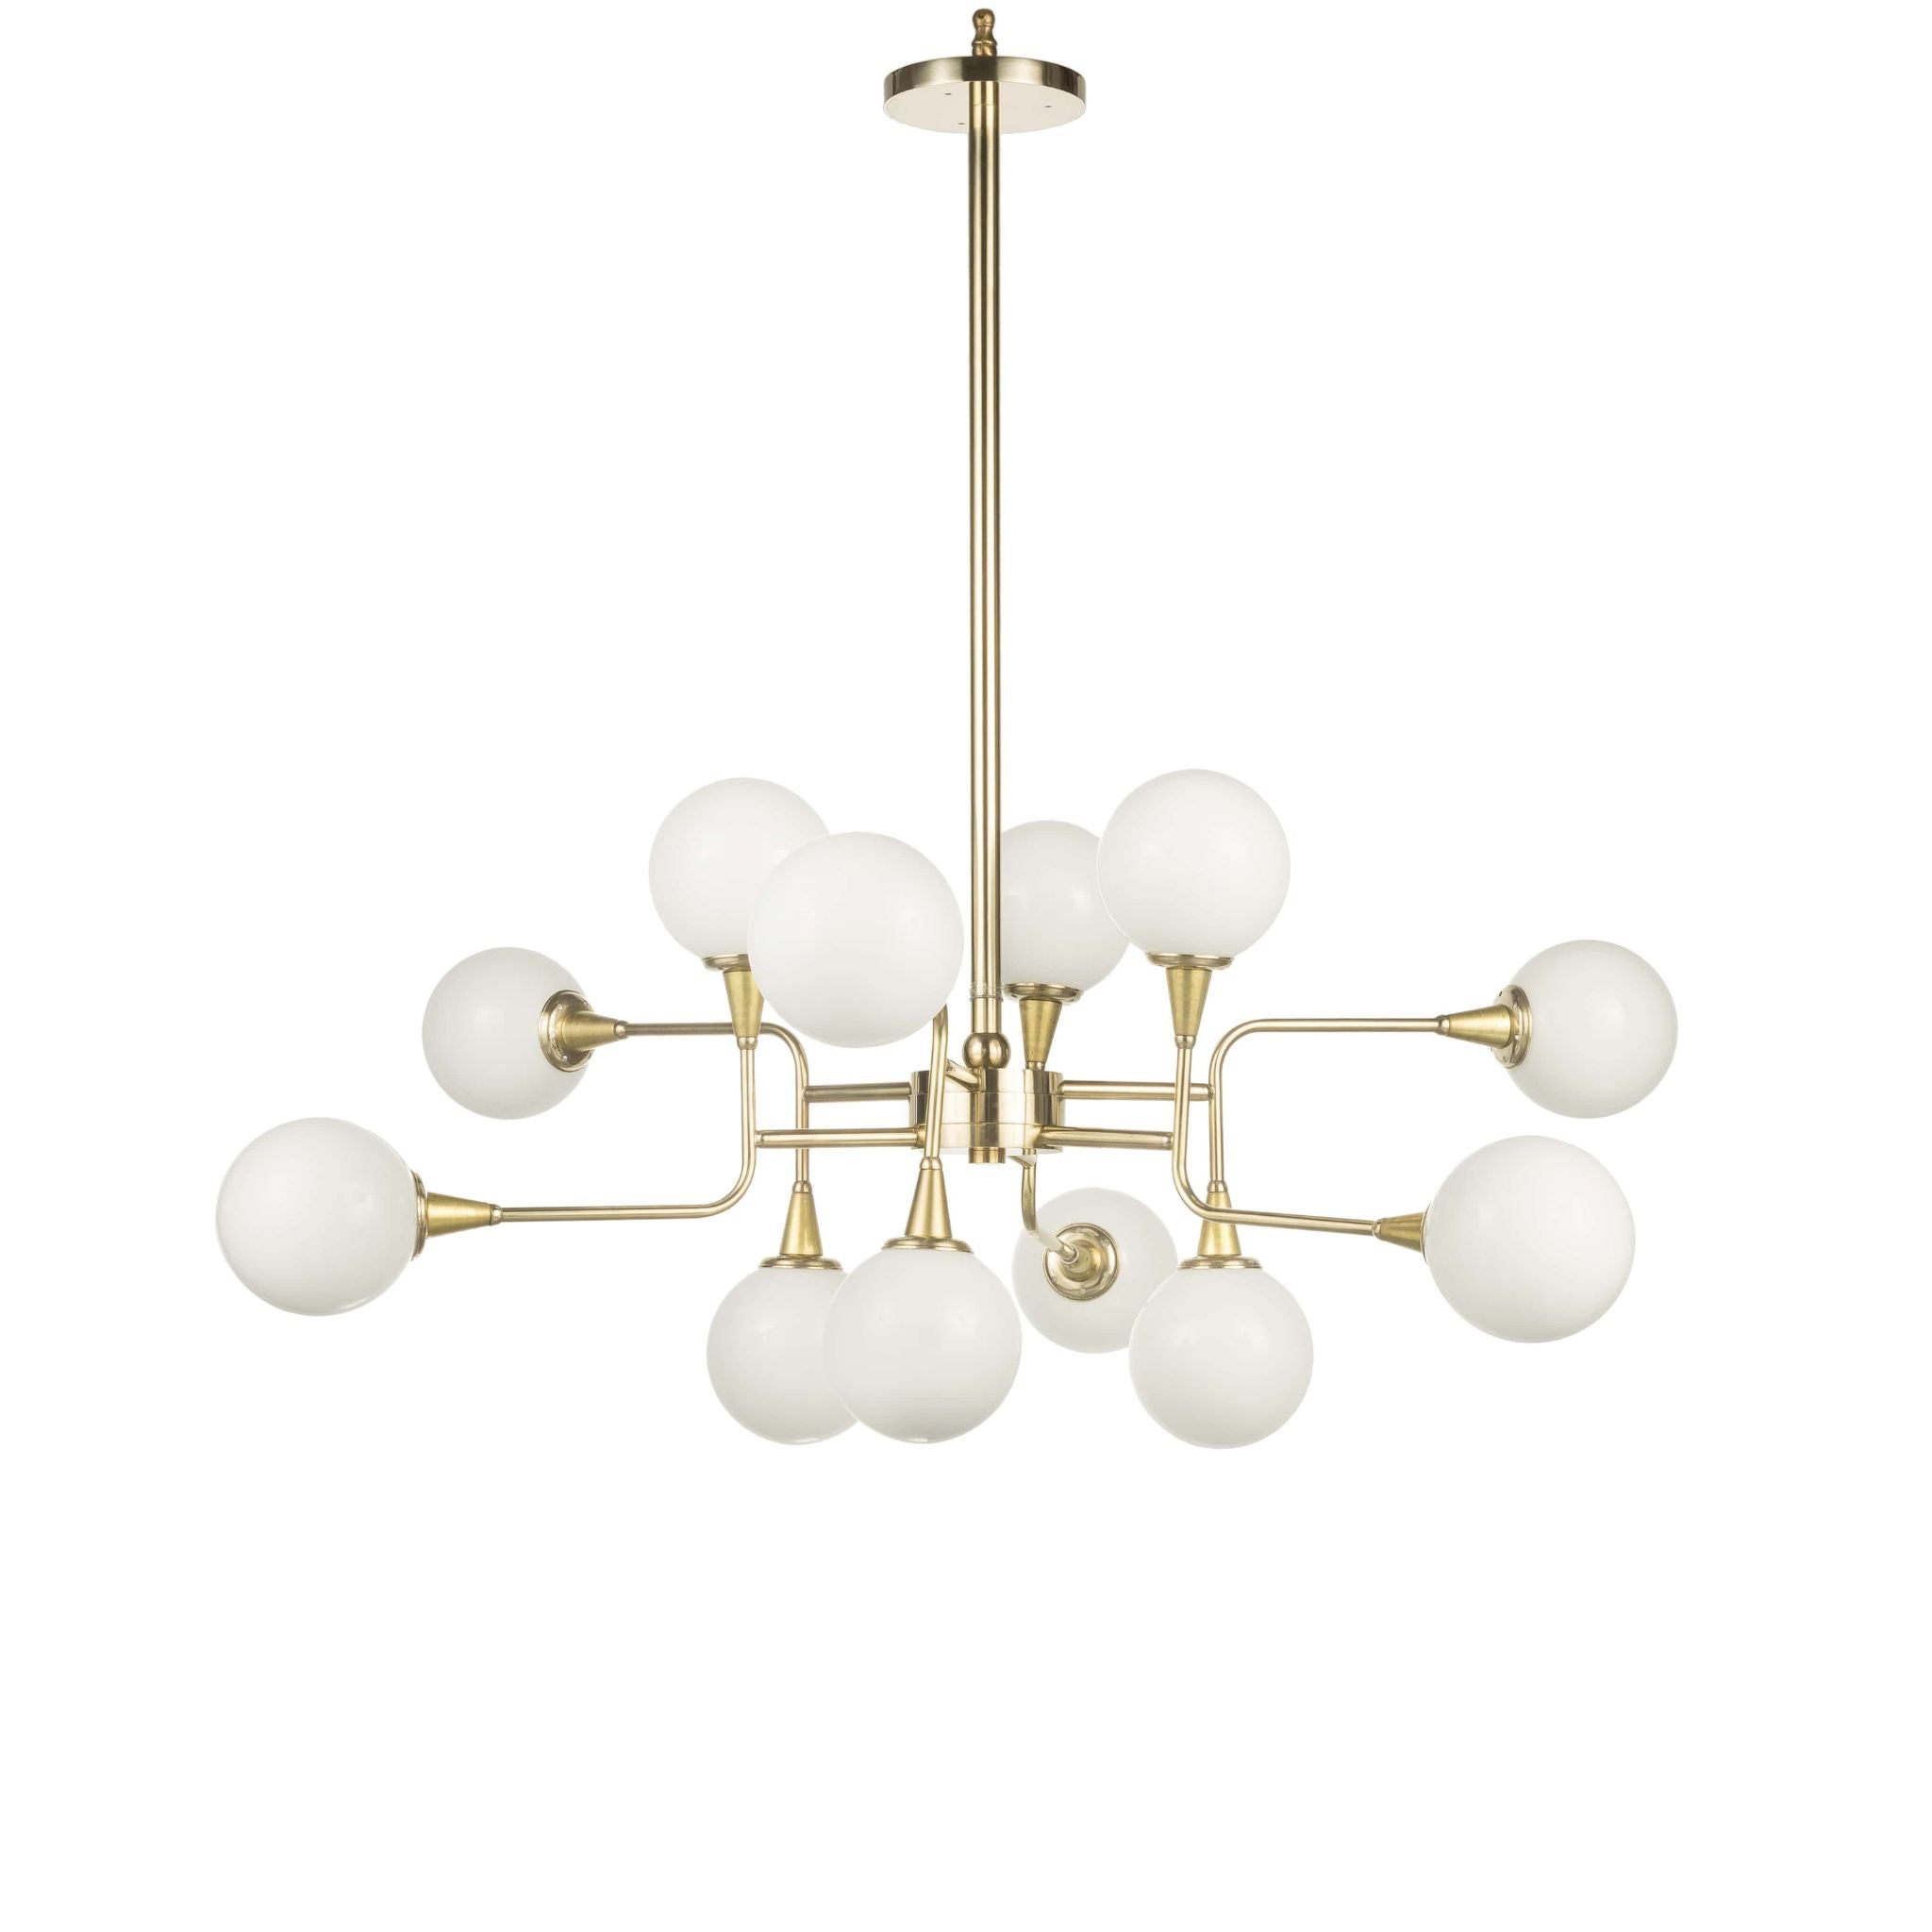 Cosmo brass chandelier with glass sphere - ilbronzetto